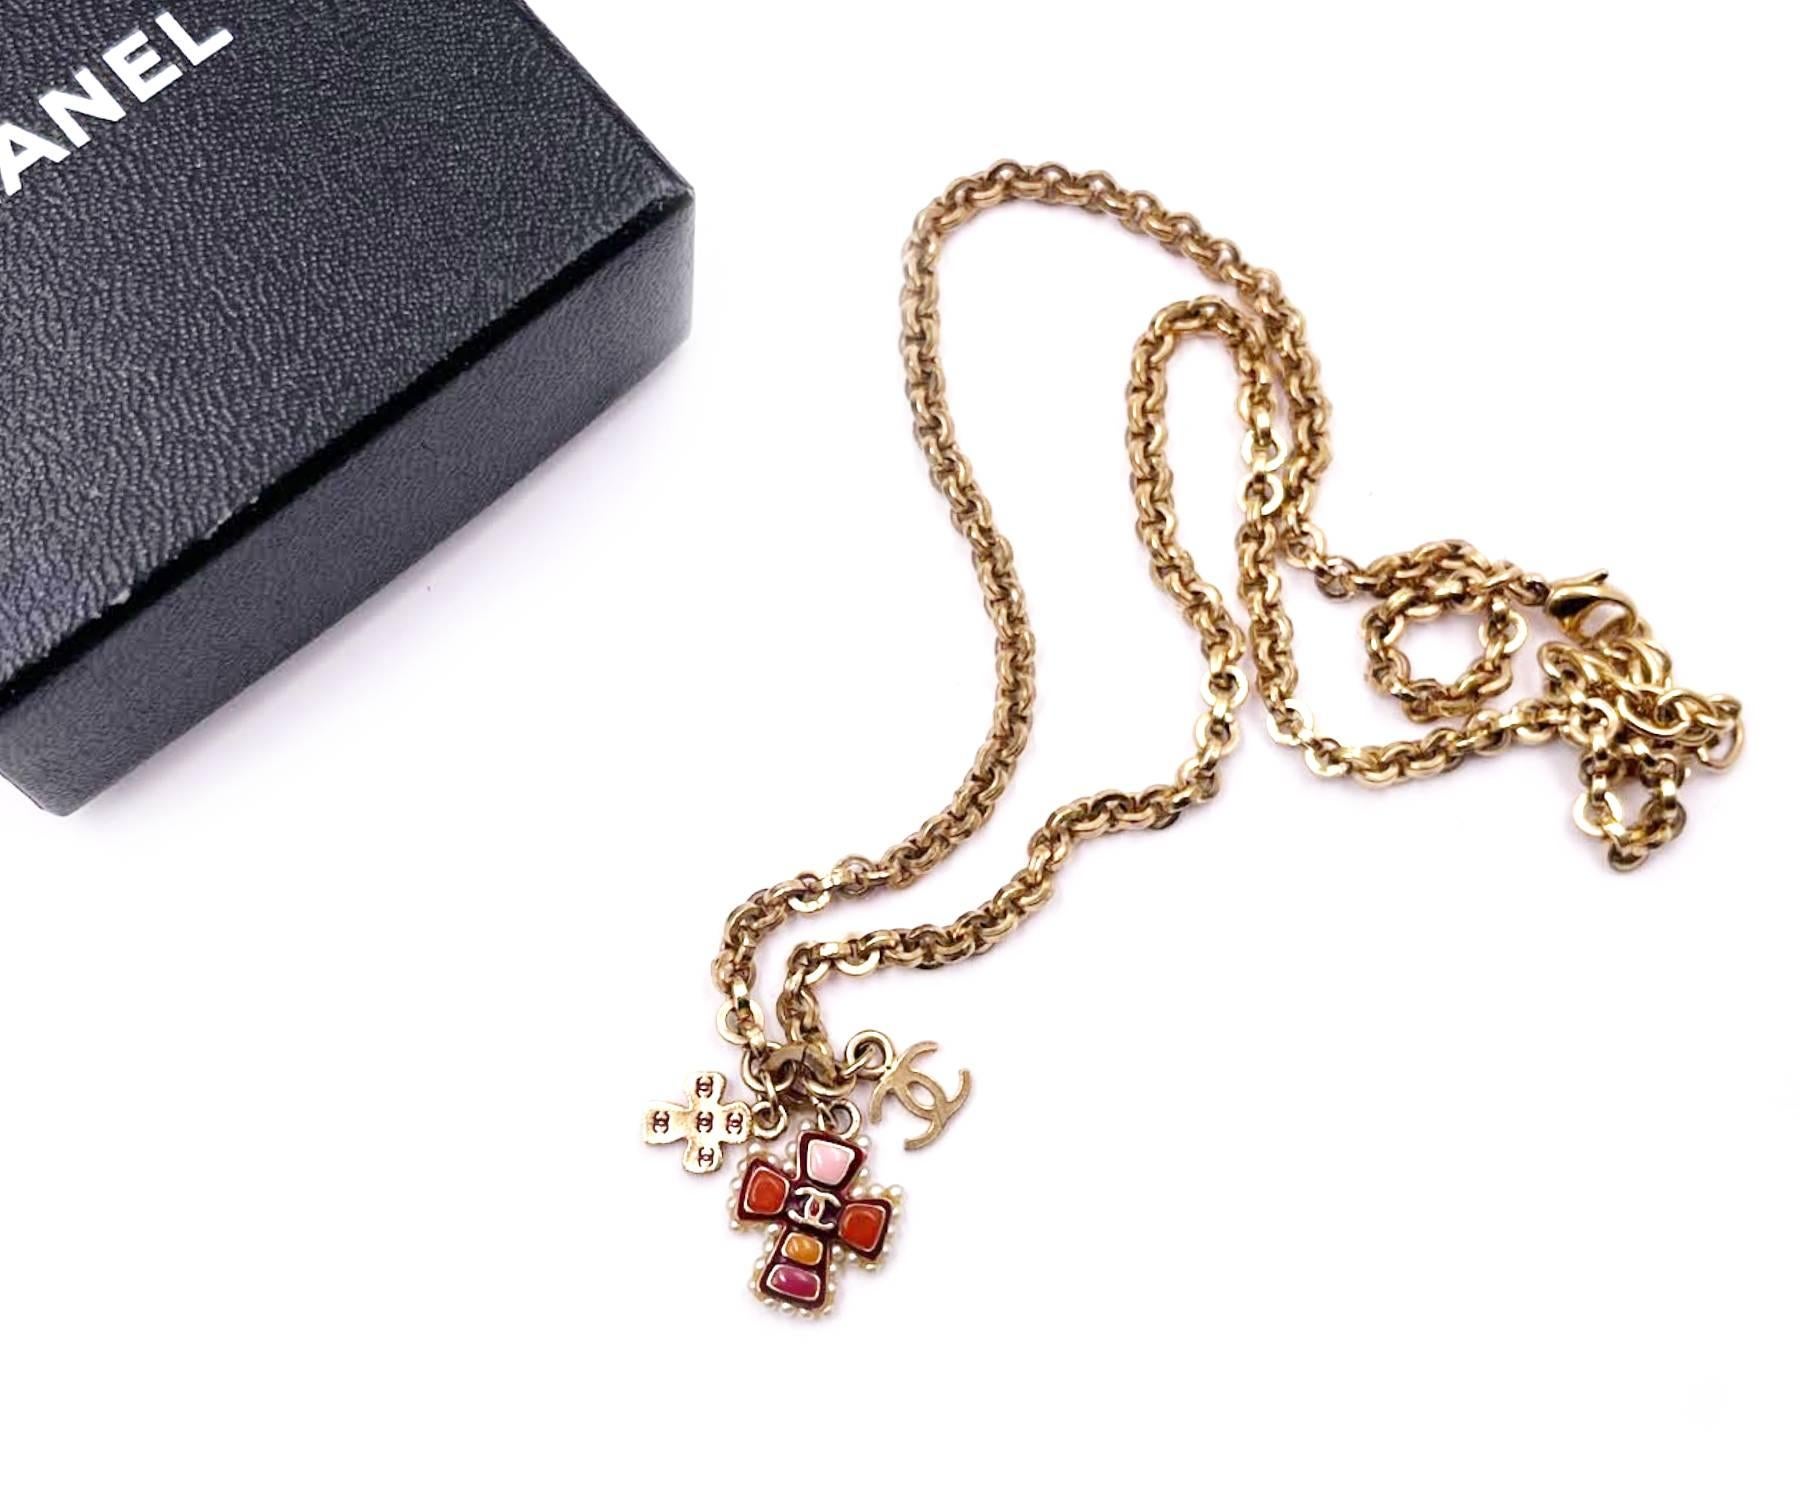 Chanel Gold Plated CC Red Resin Cross Charms Pendant Necklace

* Marked 03
* Made in France
*Comes with the original box

-The pendant is approximately 0.75″ x 0.5″.
-The chain is approximately 19″.
-There is a scratch on the cc charm.
-In an